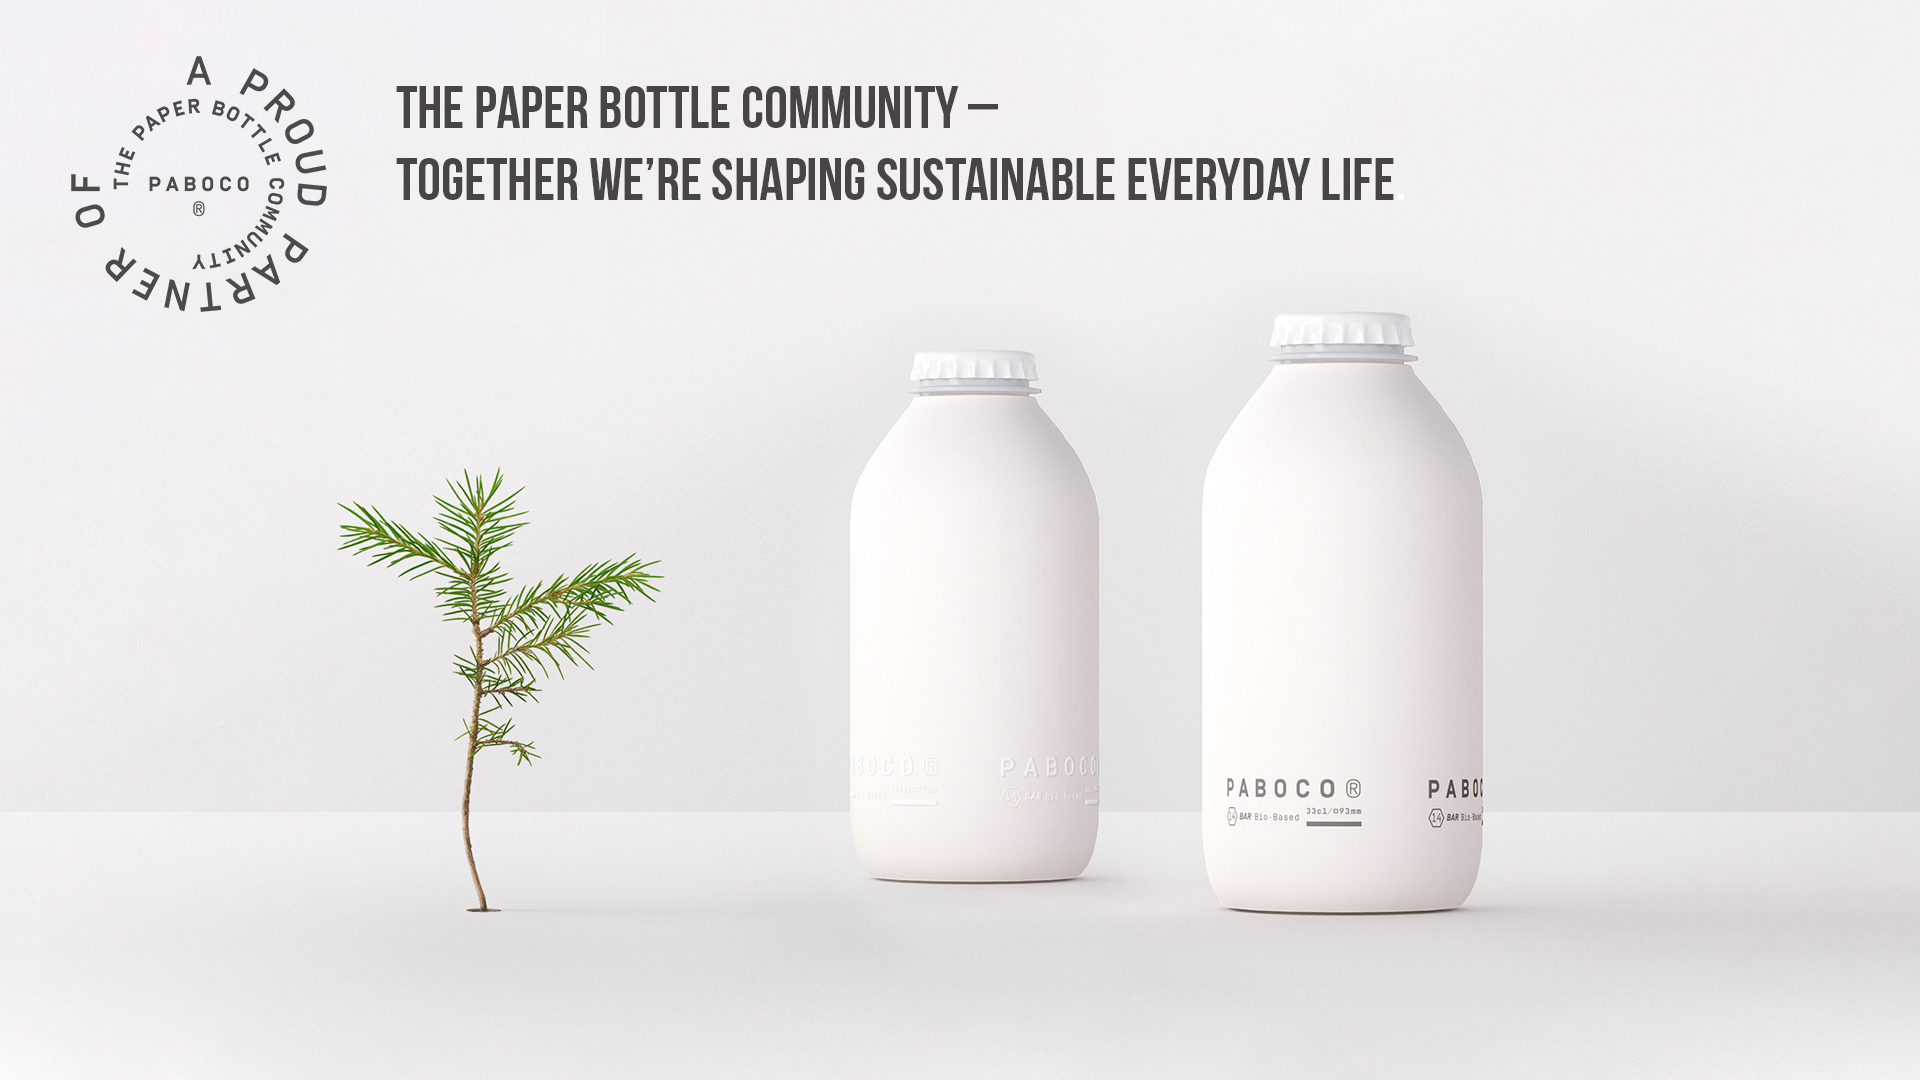 Revolutionary innovation: Teknos cooperates with major brands in developing a recyclable paper bottle